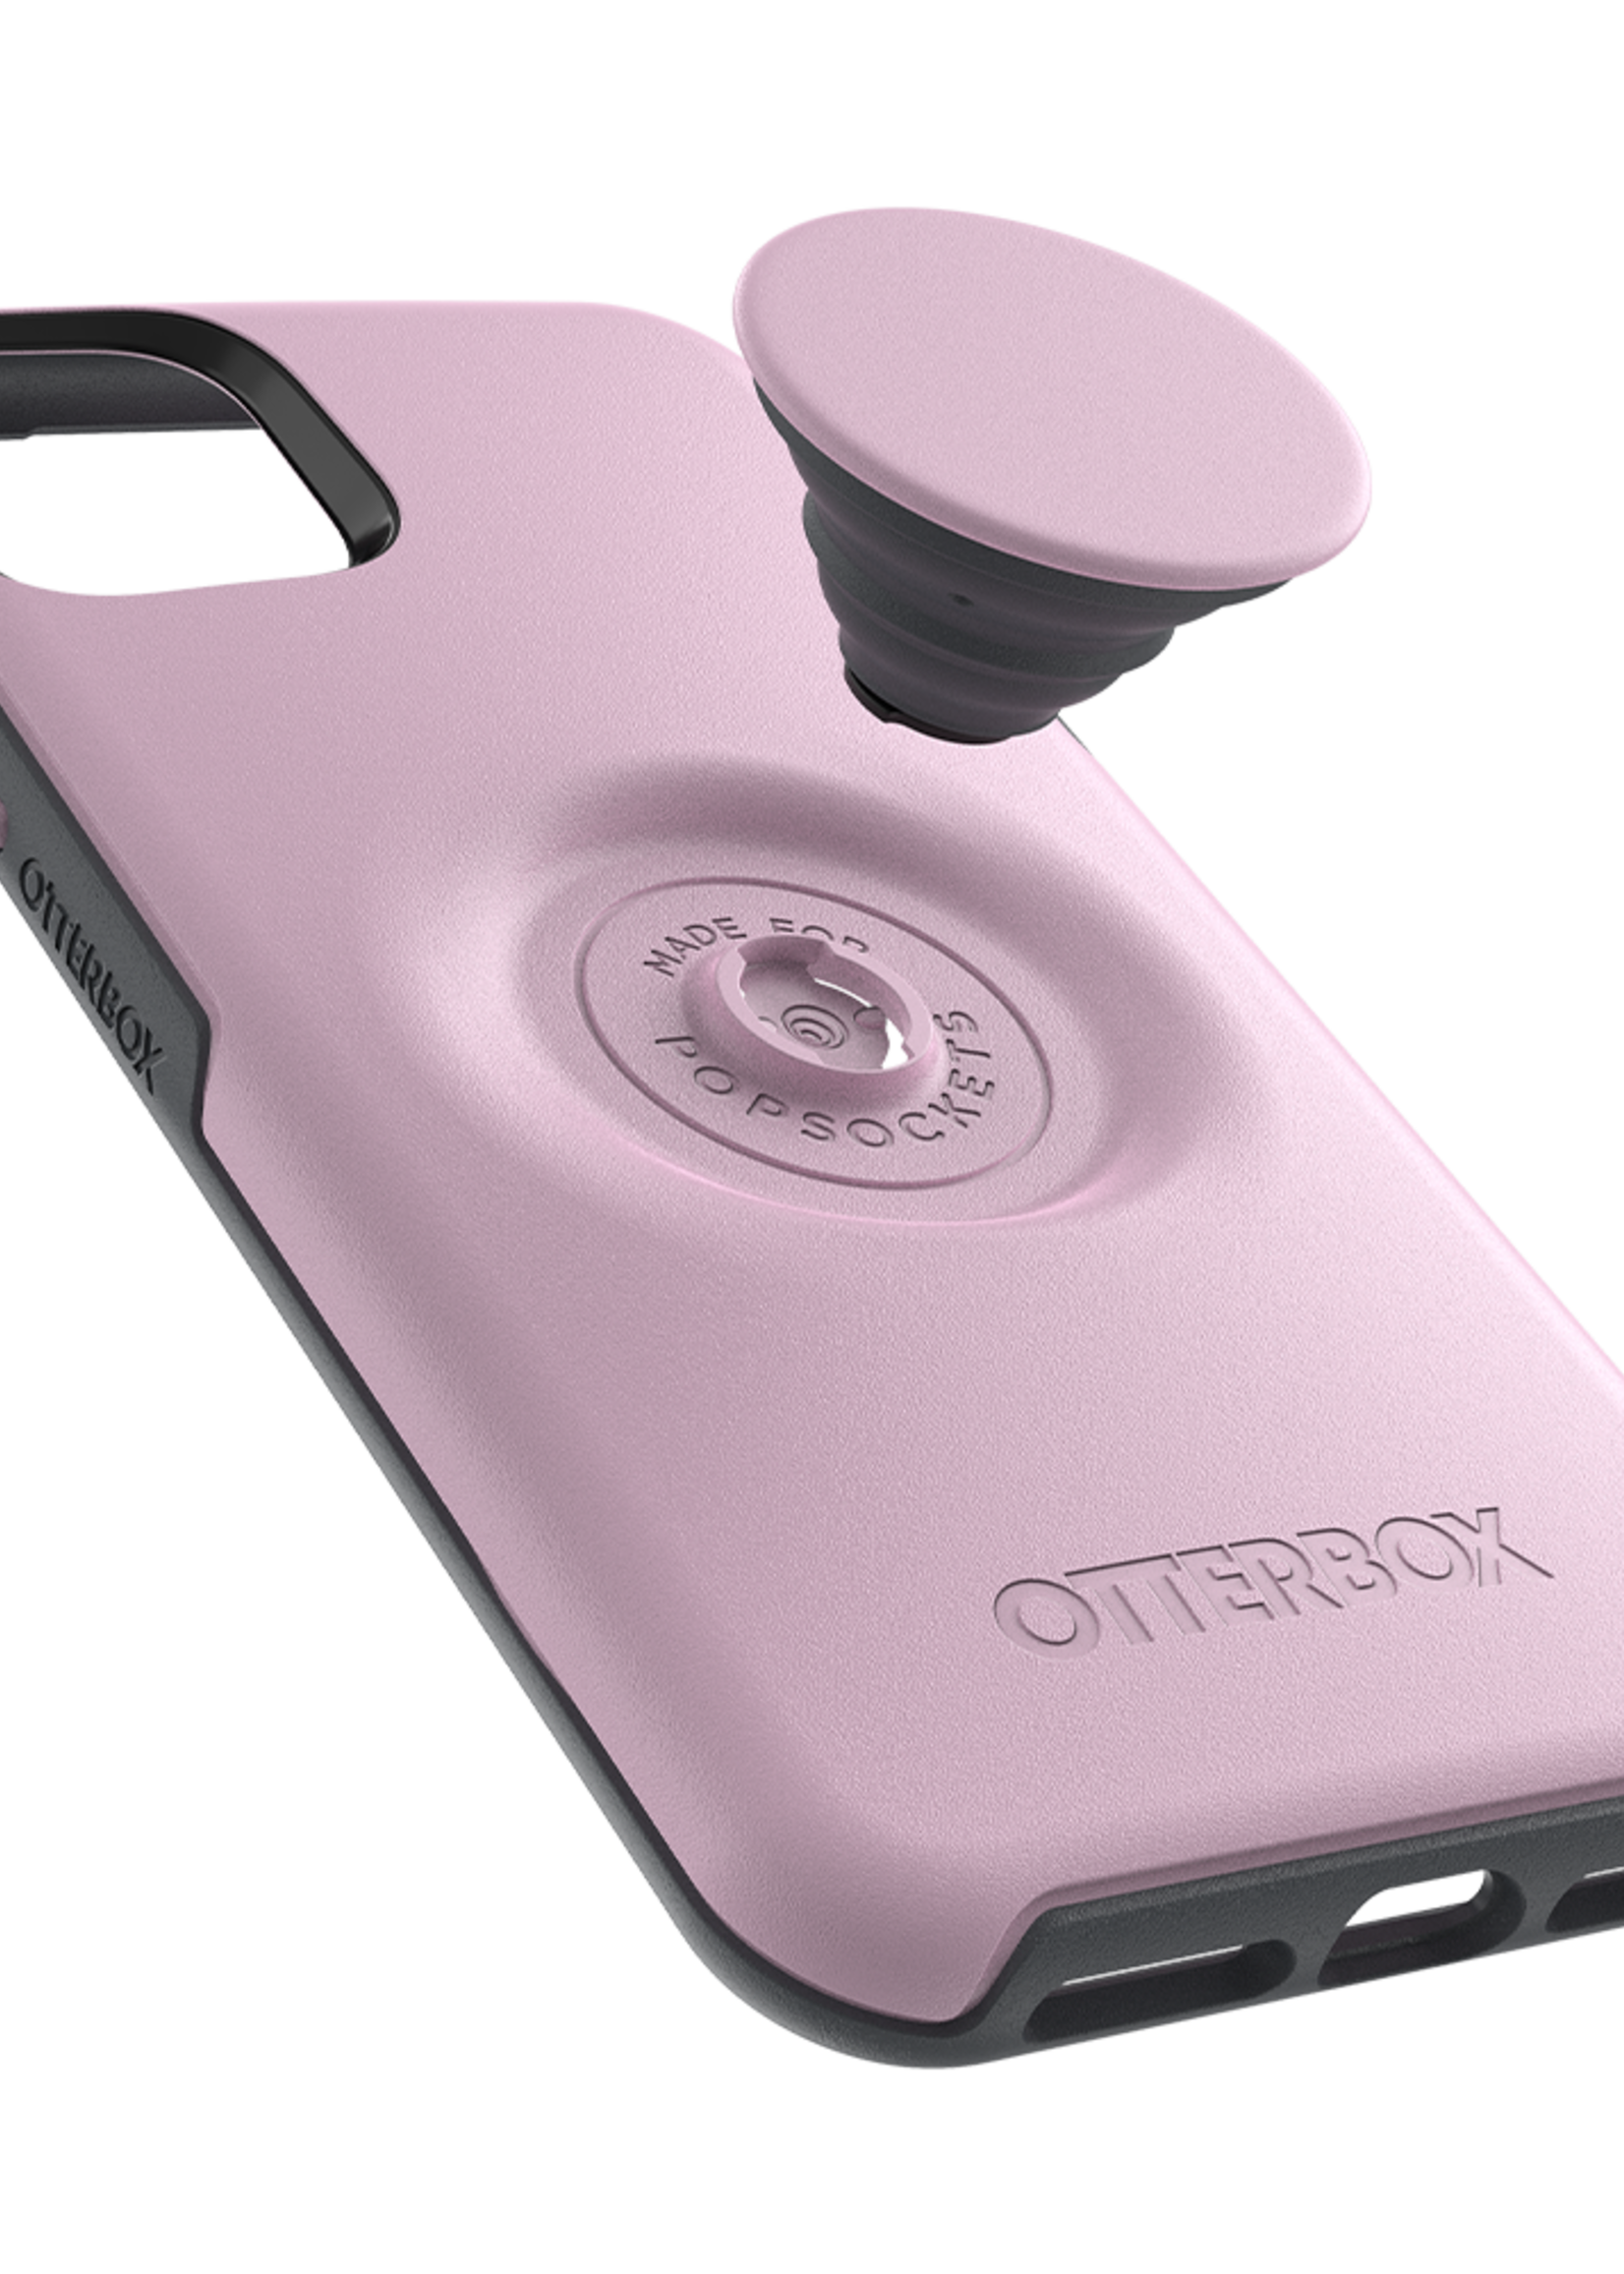 Otterbox OtterBox - Otter + Pop Symmetry Case with PopGrip for Apple iPhone 11 Pro Max - Mauvelous